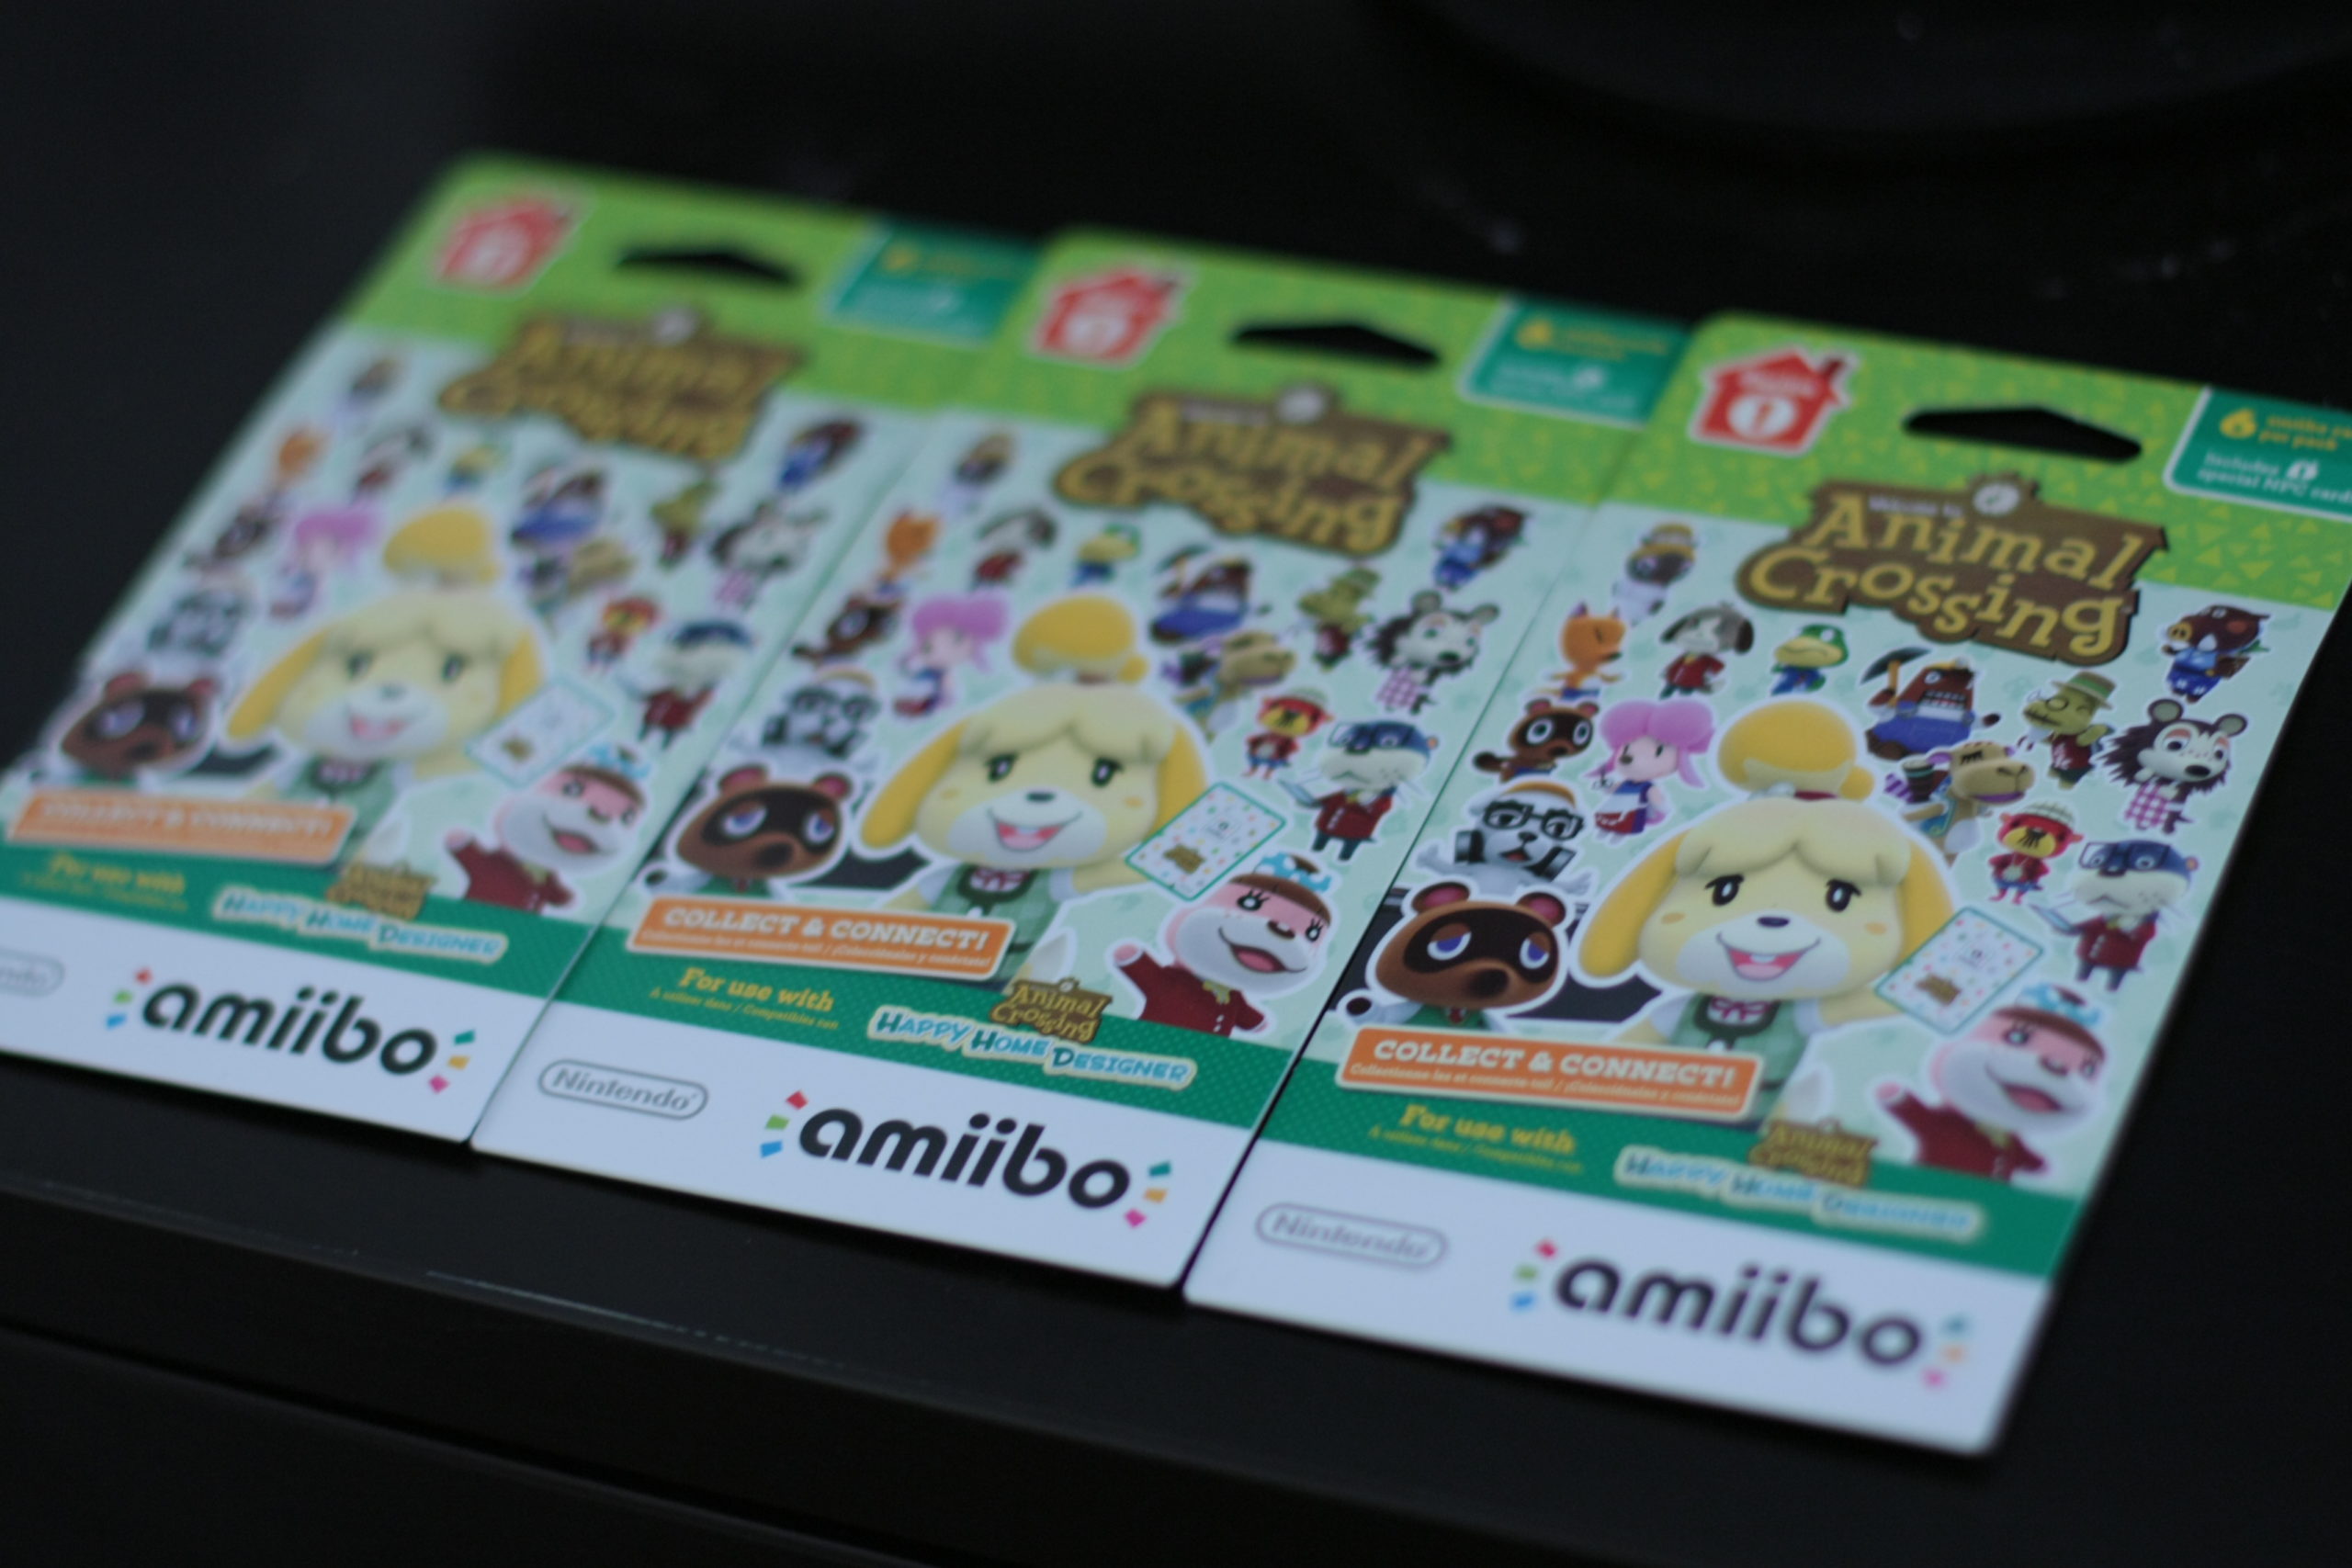 I Bought Five Packs Of Animal Crossing Amiibo Cards And Didn’t Fucking Get Isabelle